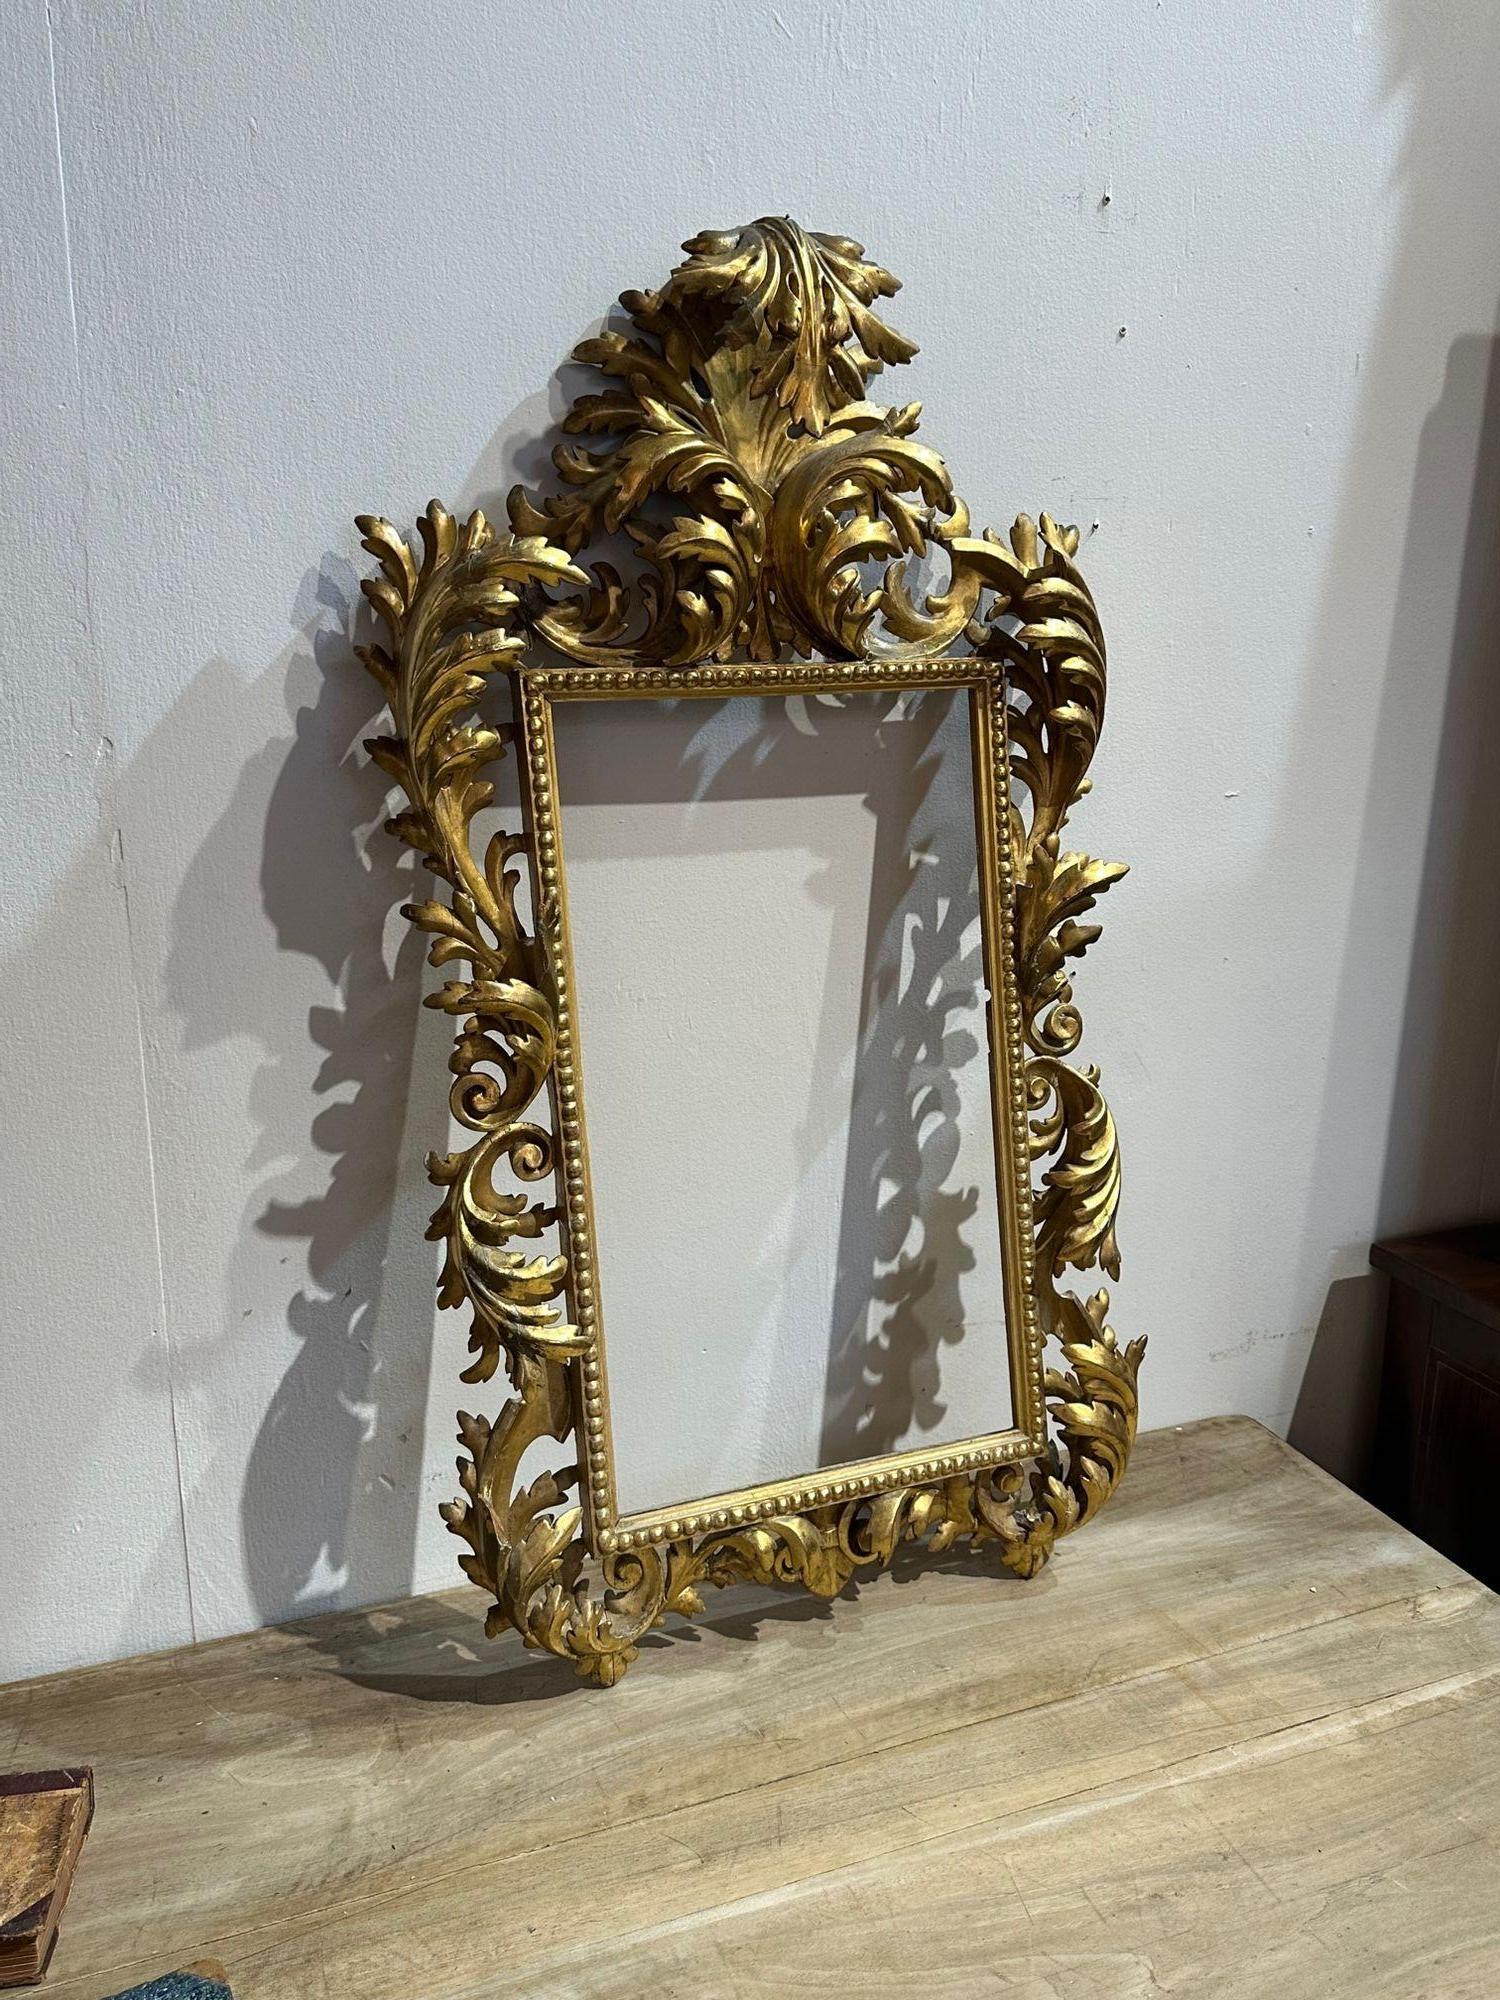 Early 19th century Italian carved and giltwood narrow Florentine frame. Circa 1840. A fine addition to any home!